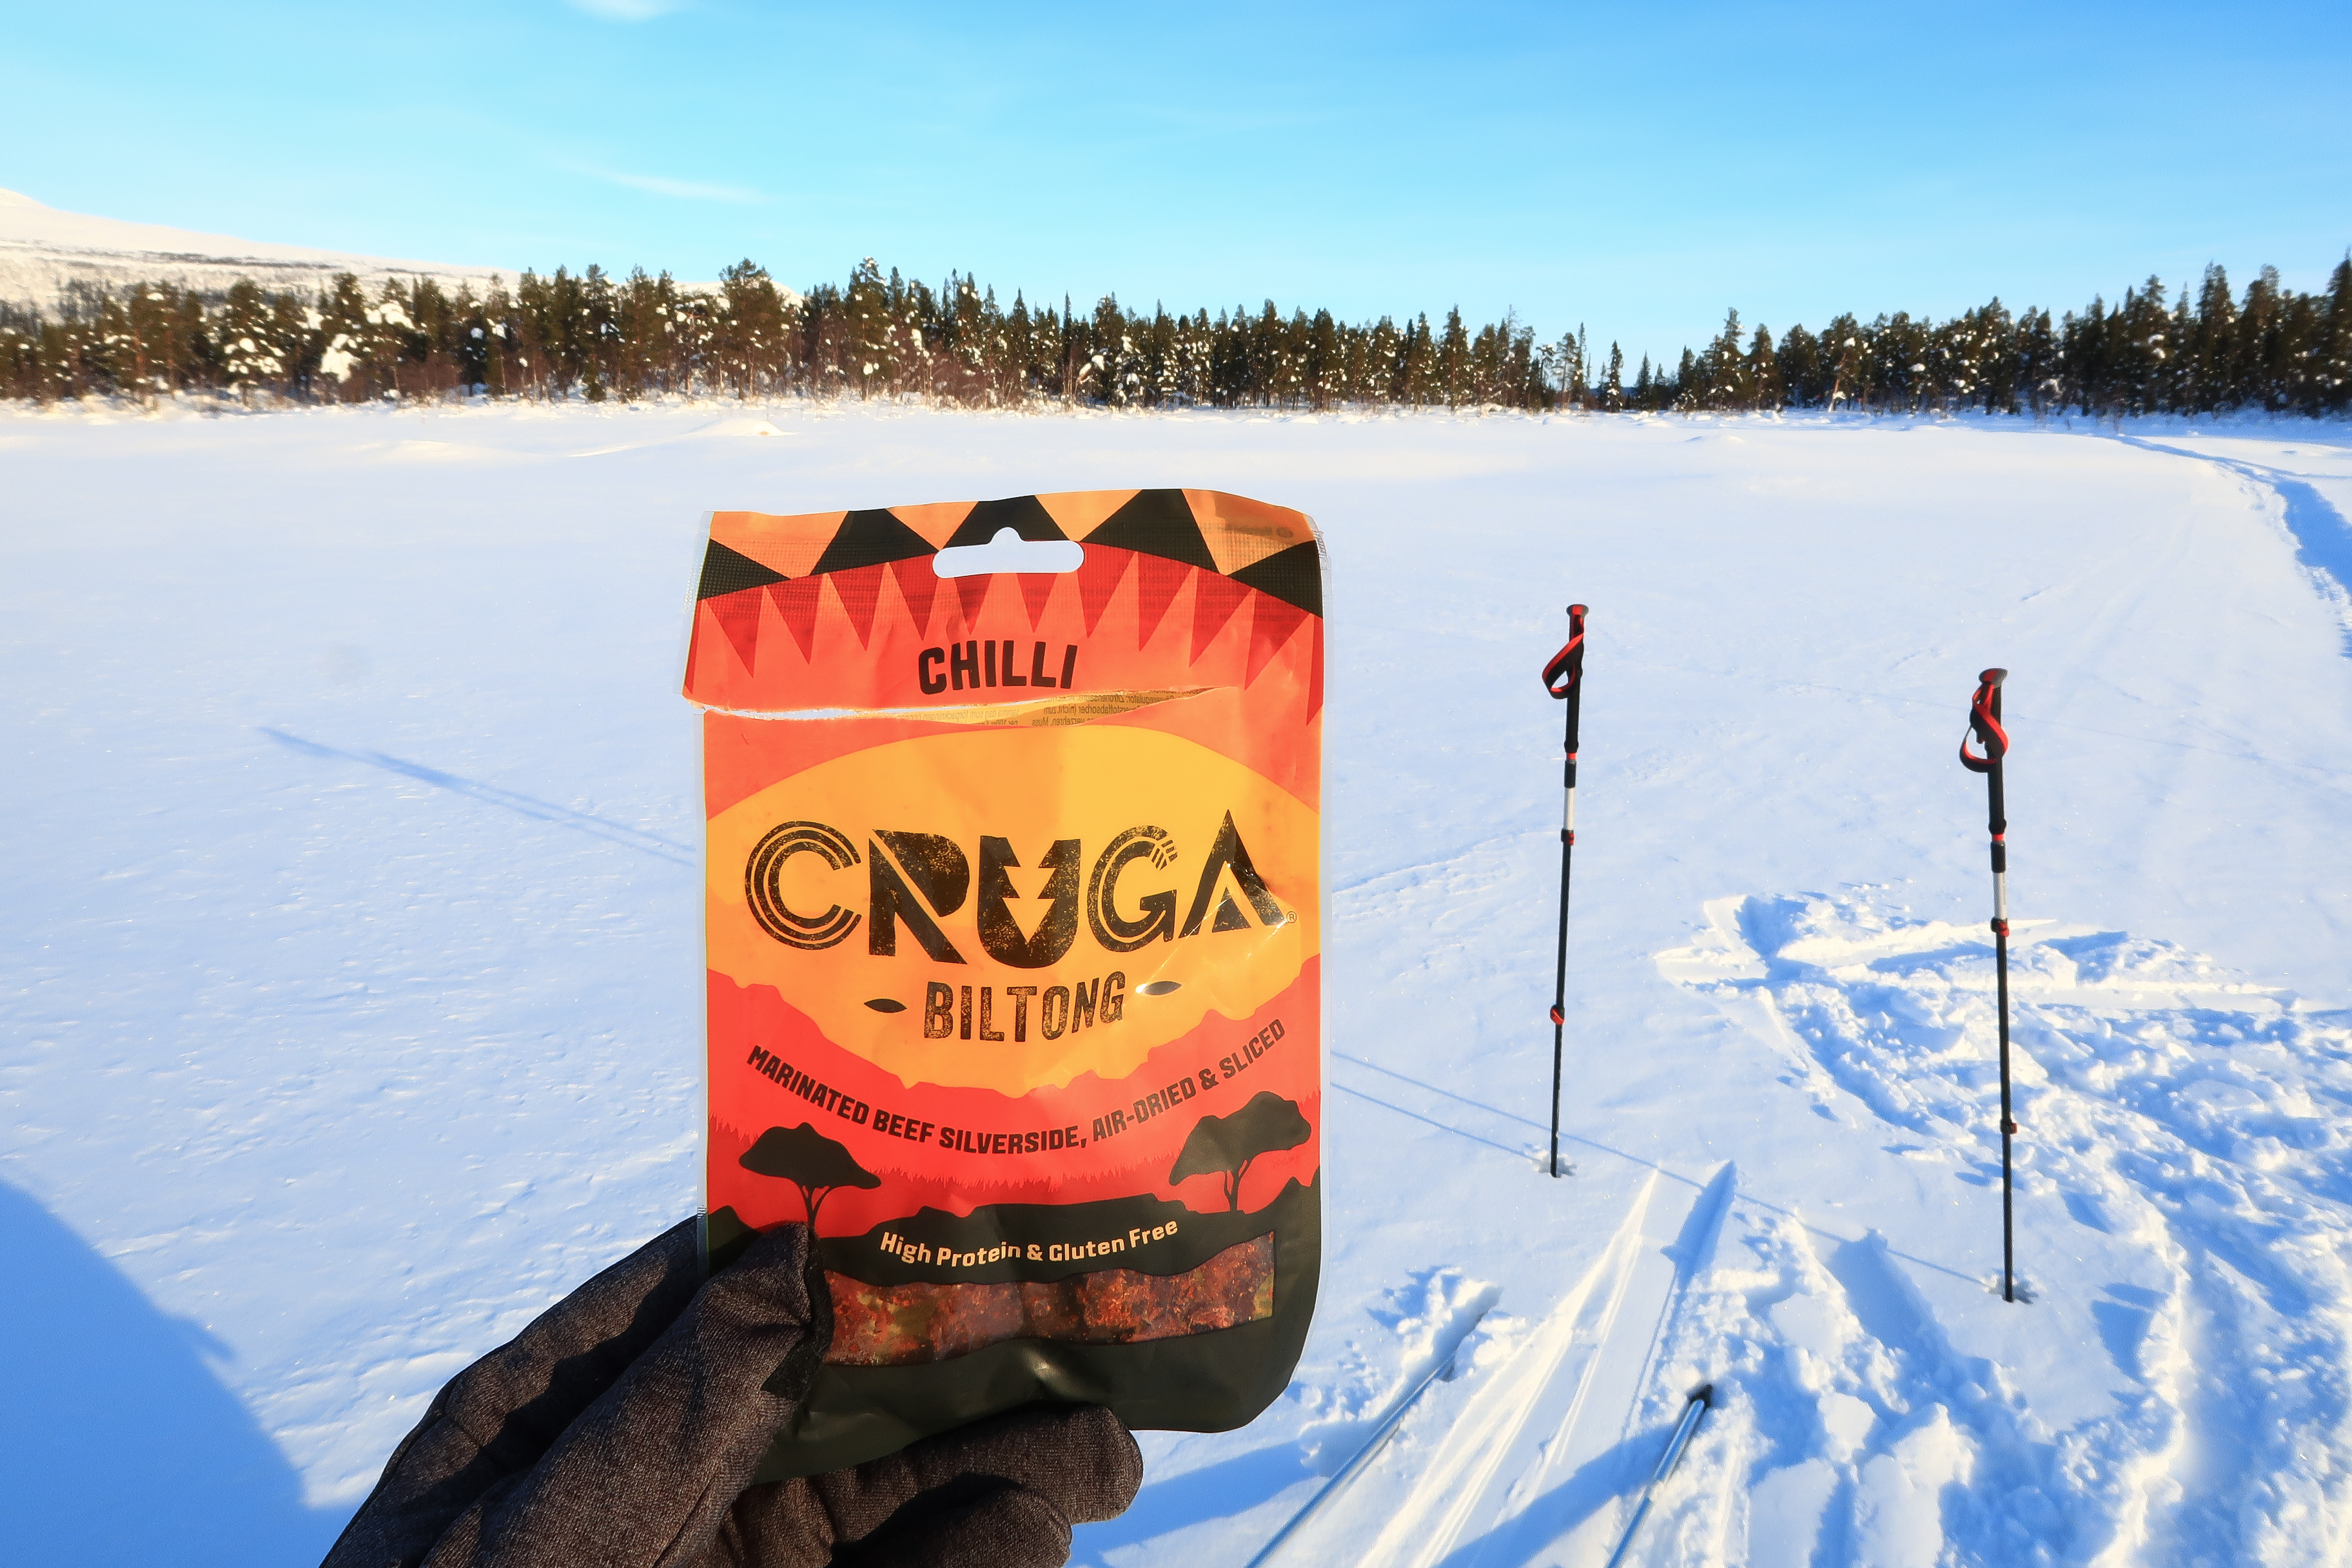 Biltong Became my Favorite Trail Snack in the Cold